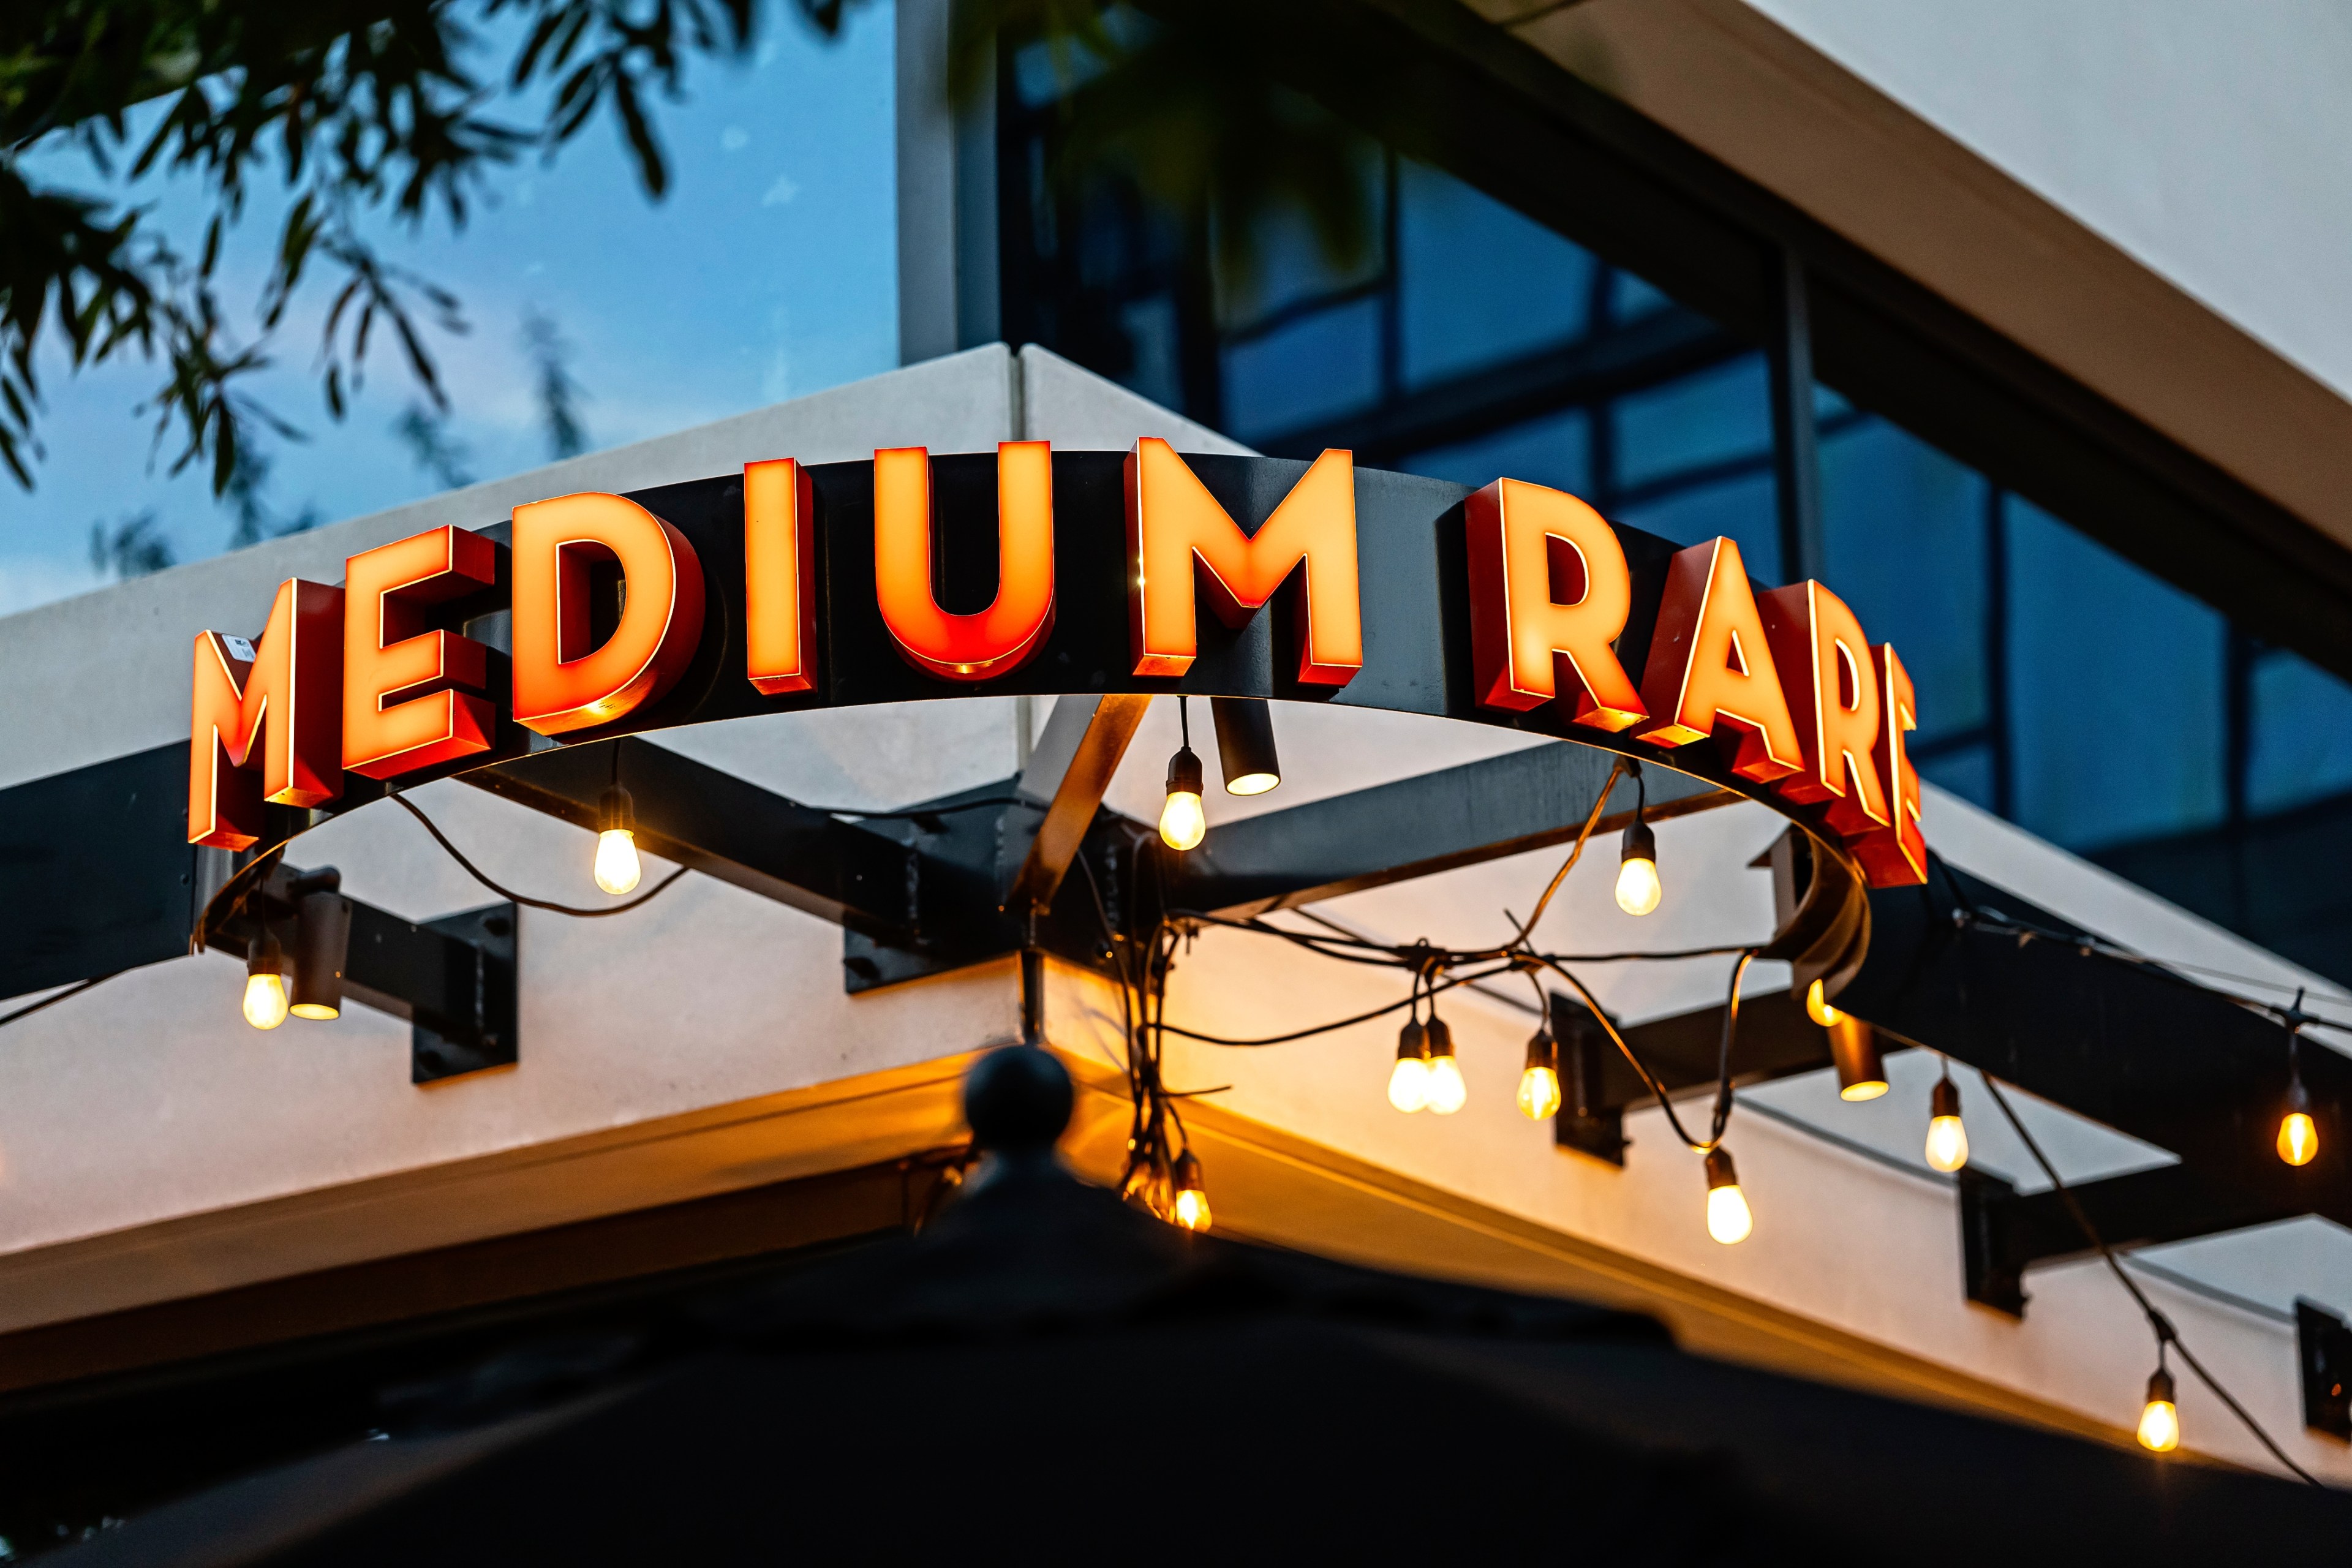 Glowing orange letters spell out the words "Medium" and "Rare" against a circular metal frame above a restaurant entrance.